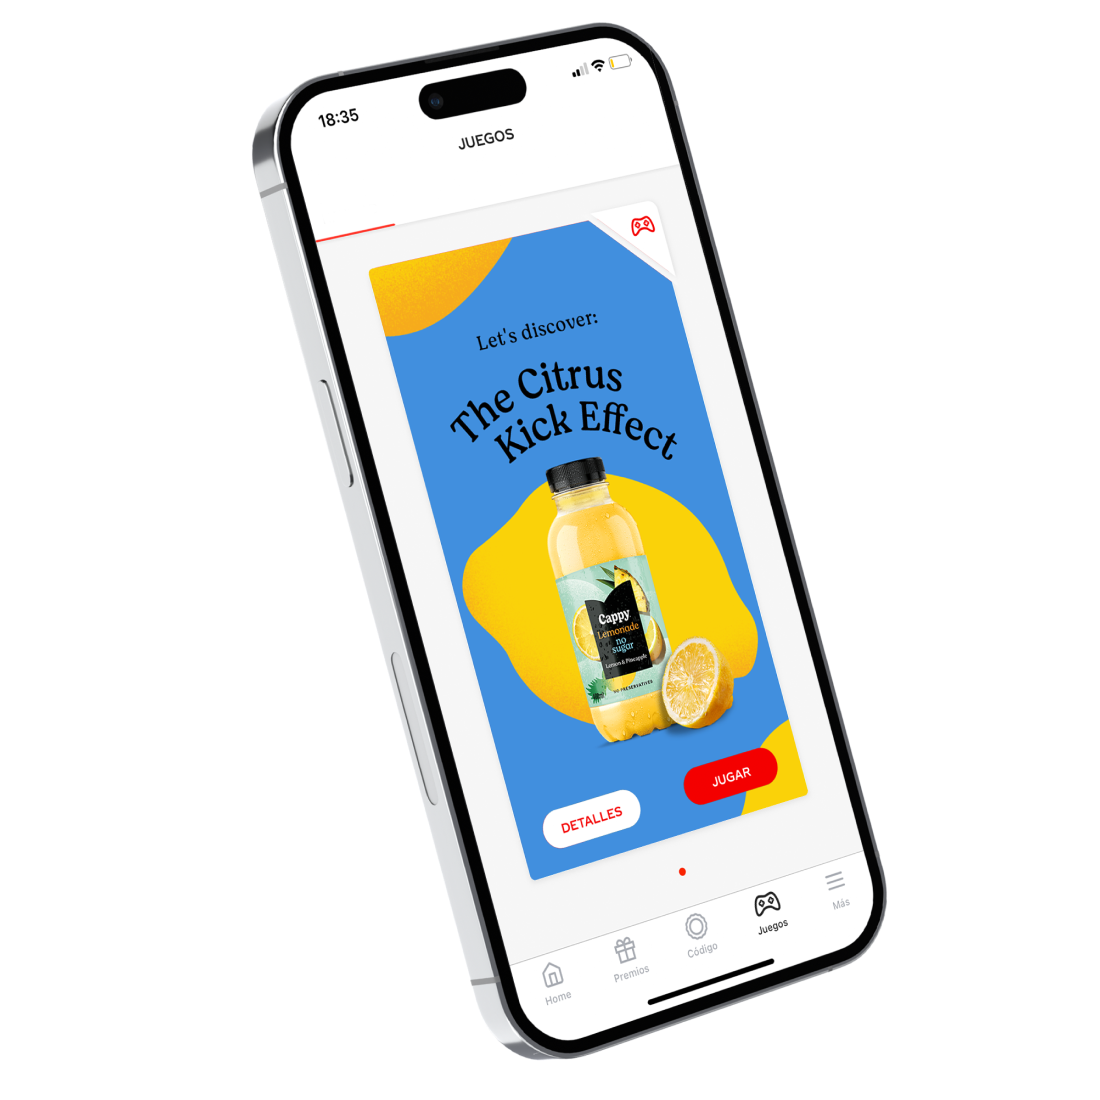 We see a smartphone with the Coca-Cola app open and the cover of Cappy's Citrus Kick effect.